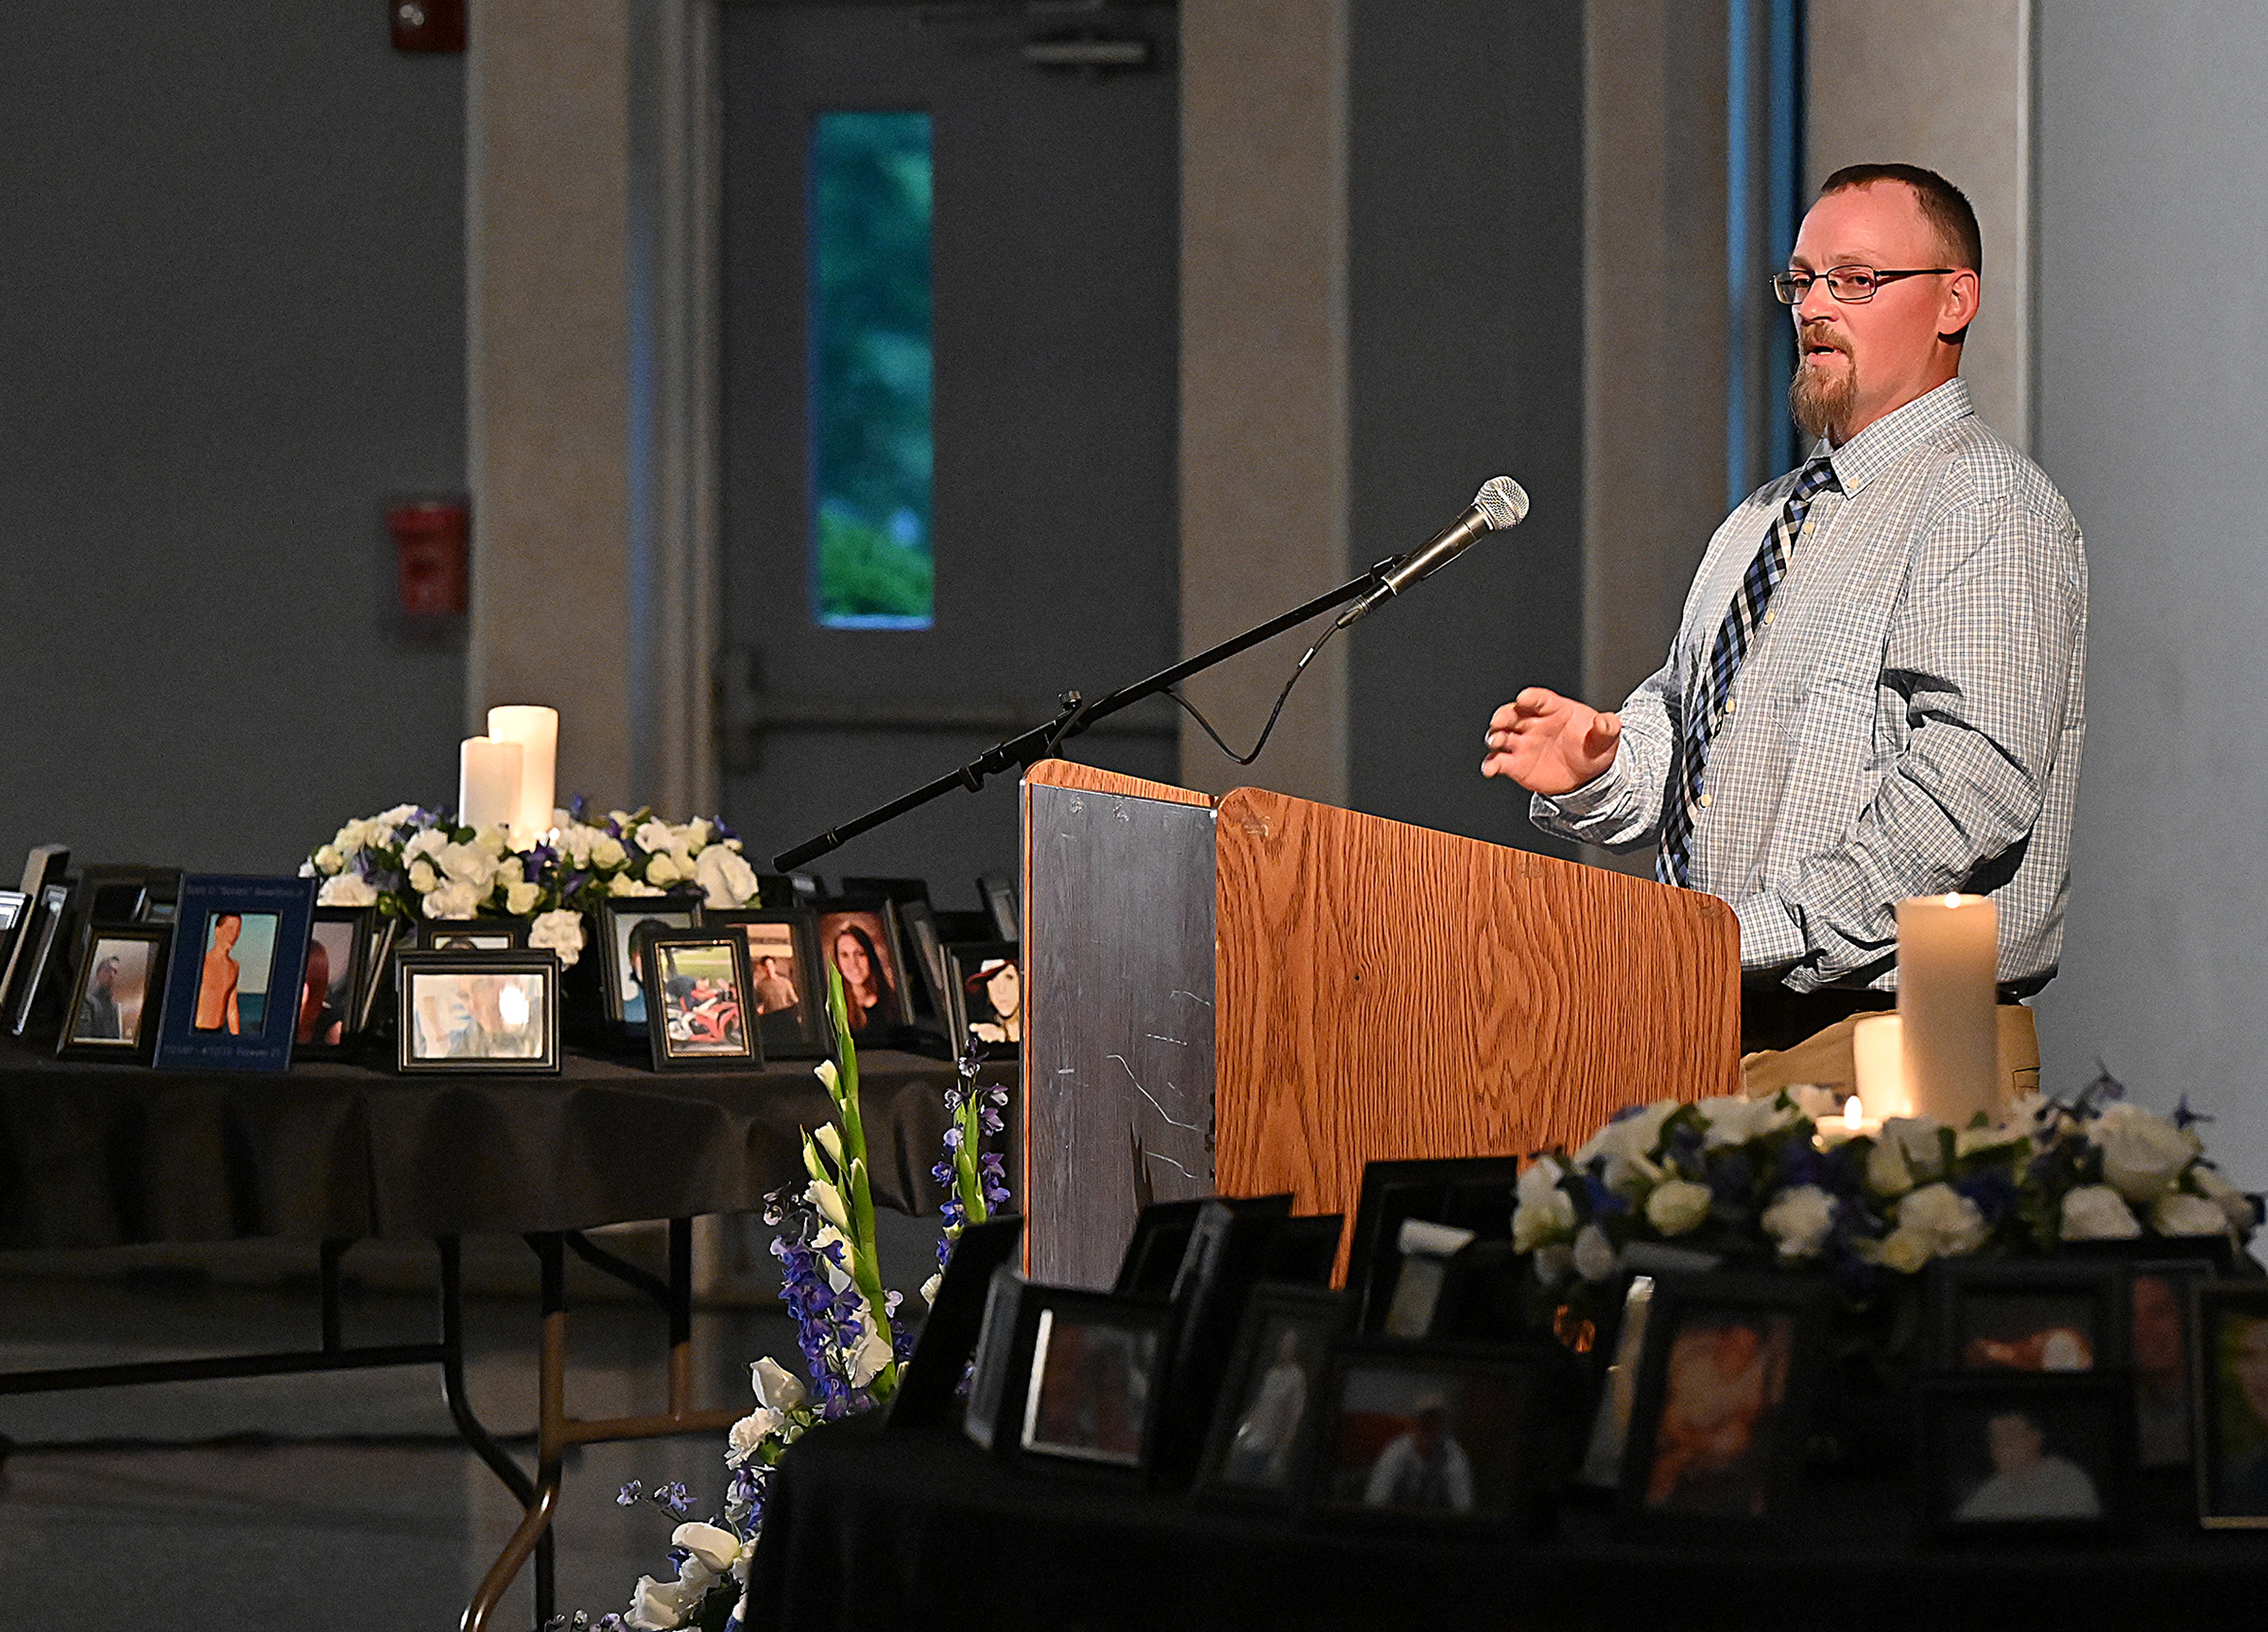 Brian Kimmel, offers "A Recovery Perspective" at the 9th Annual Drug Overdose and Prevention Vigil Tuesday at Portico at St. John in Westminster. (Jeffrey F. Bill/Staff photo)